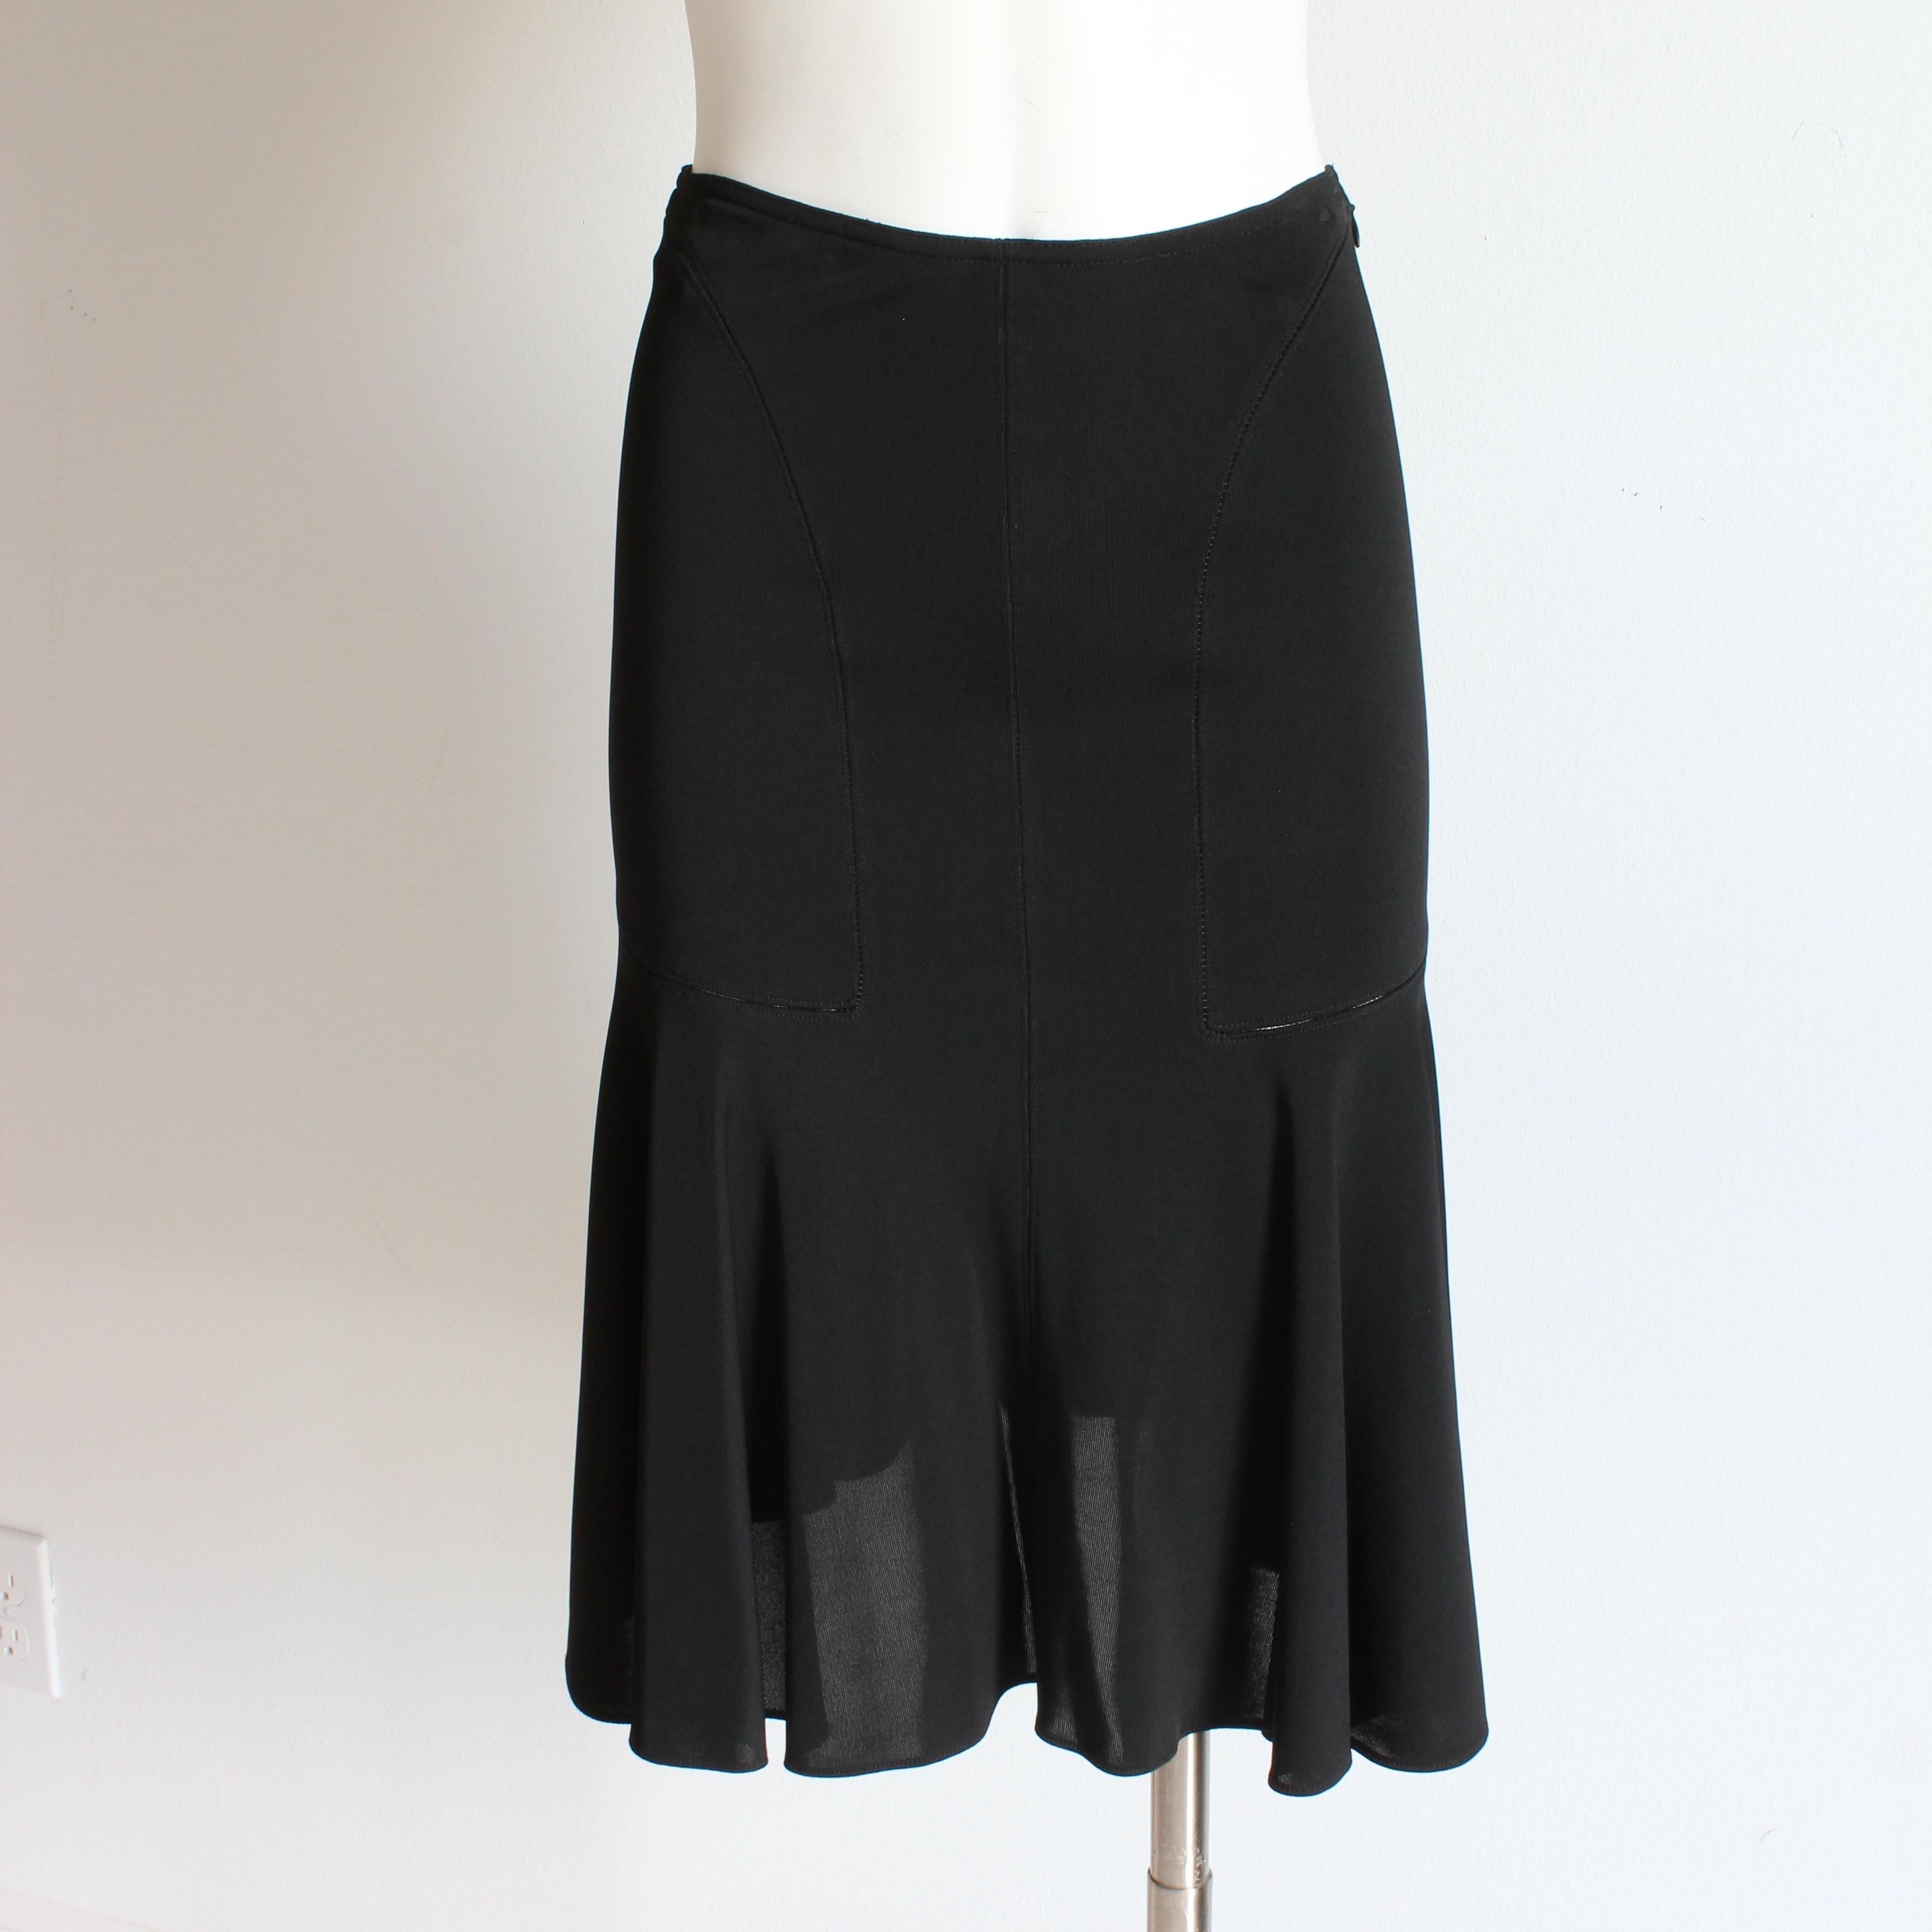 Authentic, preowned, vintage Azzedine Alaïa skirt with tulip hem, likely made in the 90s.  

Made from black viscose, it's unlined, fitted at the waist and hips and has decorative perforations in semi-circles at the front and back with a chic flared